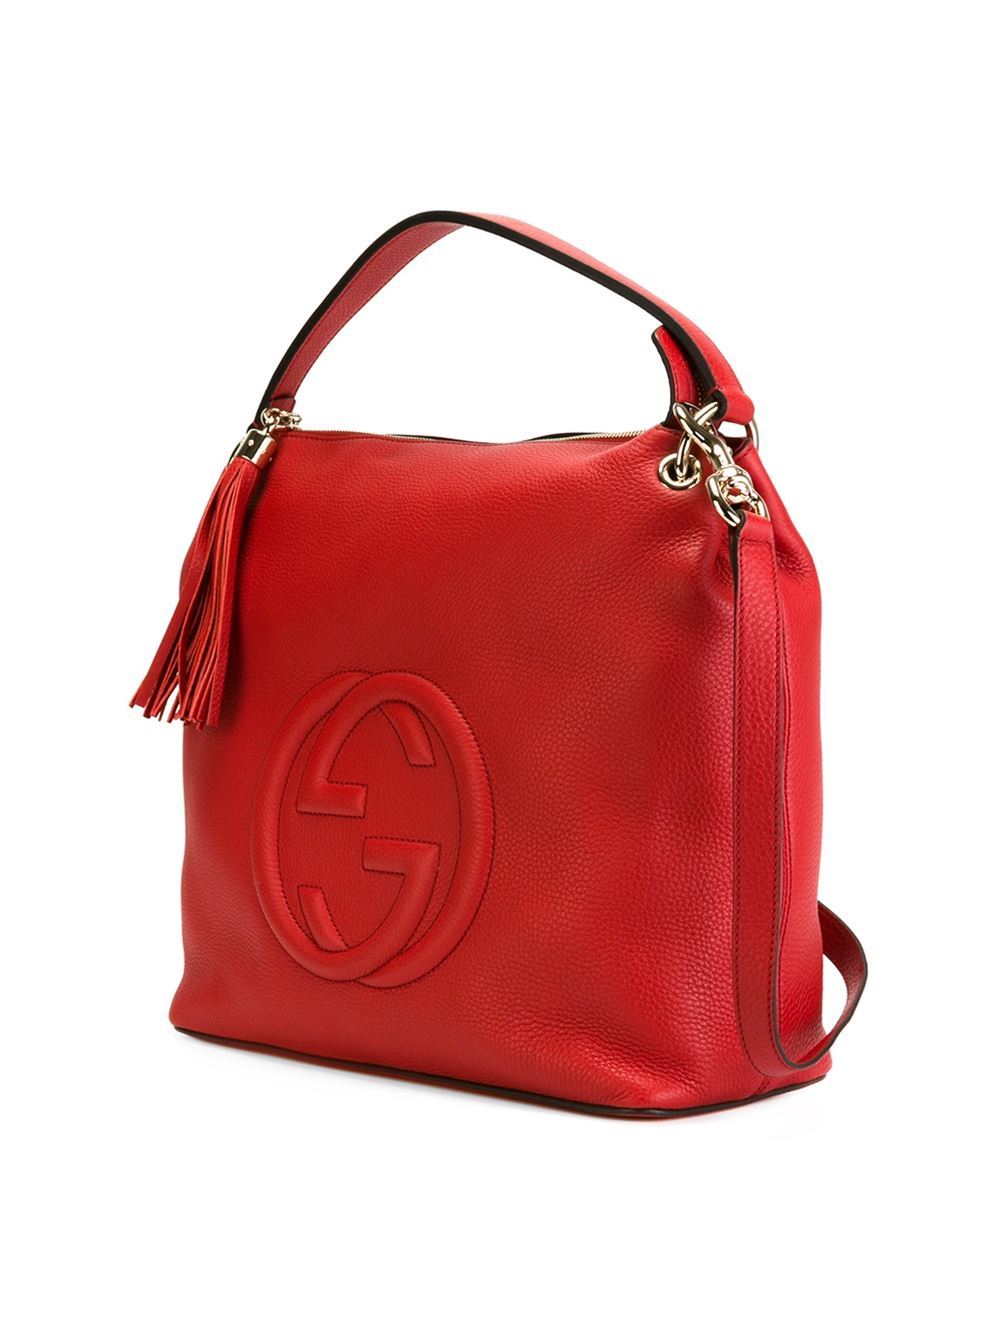 Lyst - Gucci Soho Bag in Red